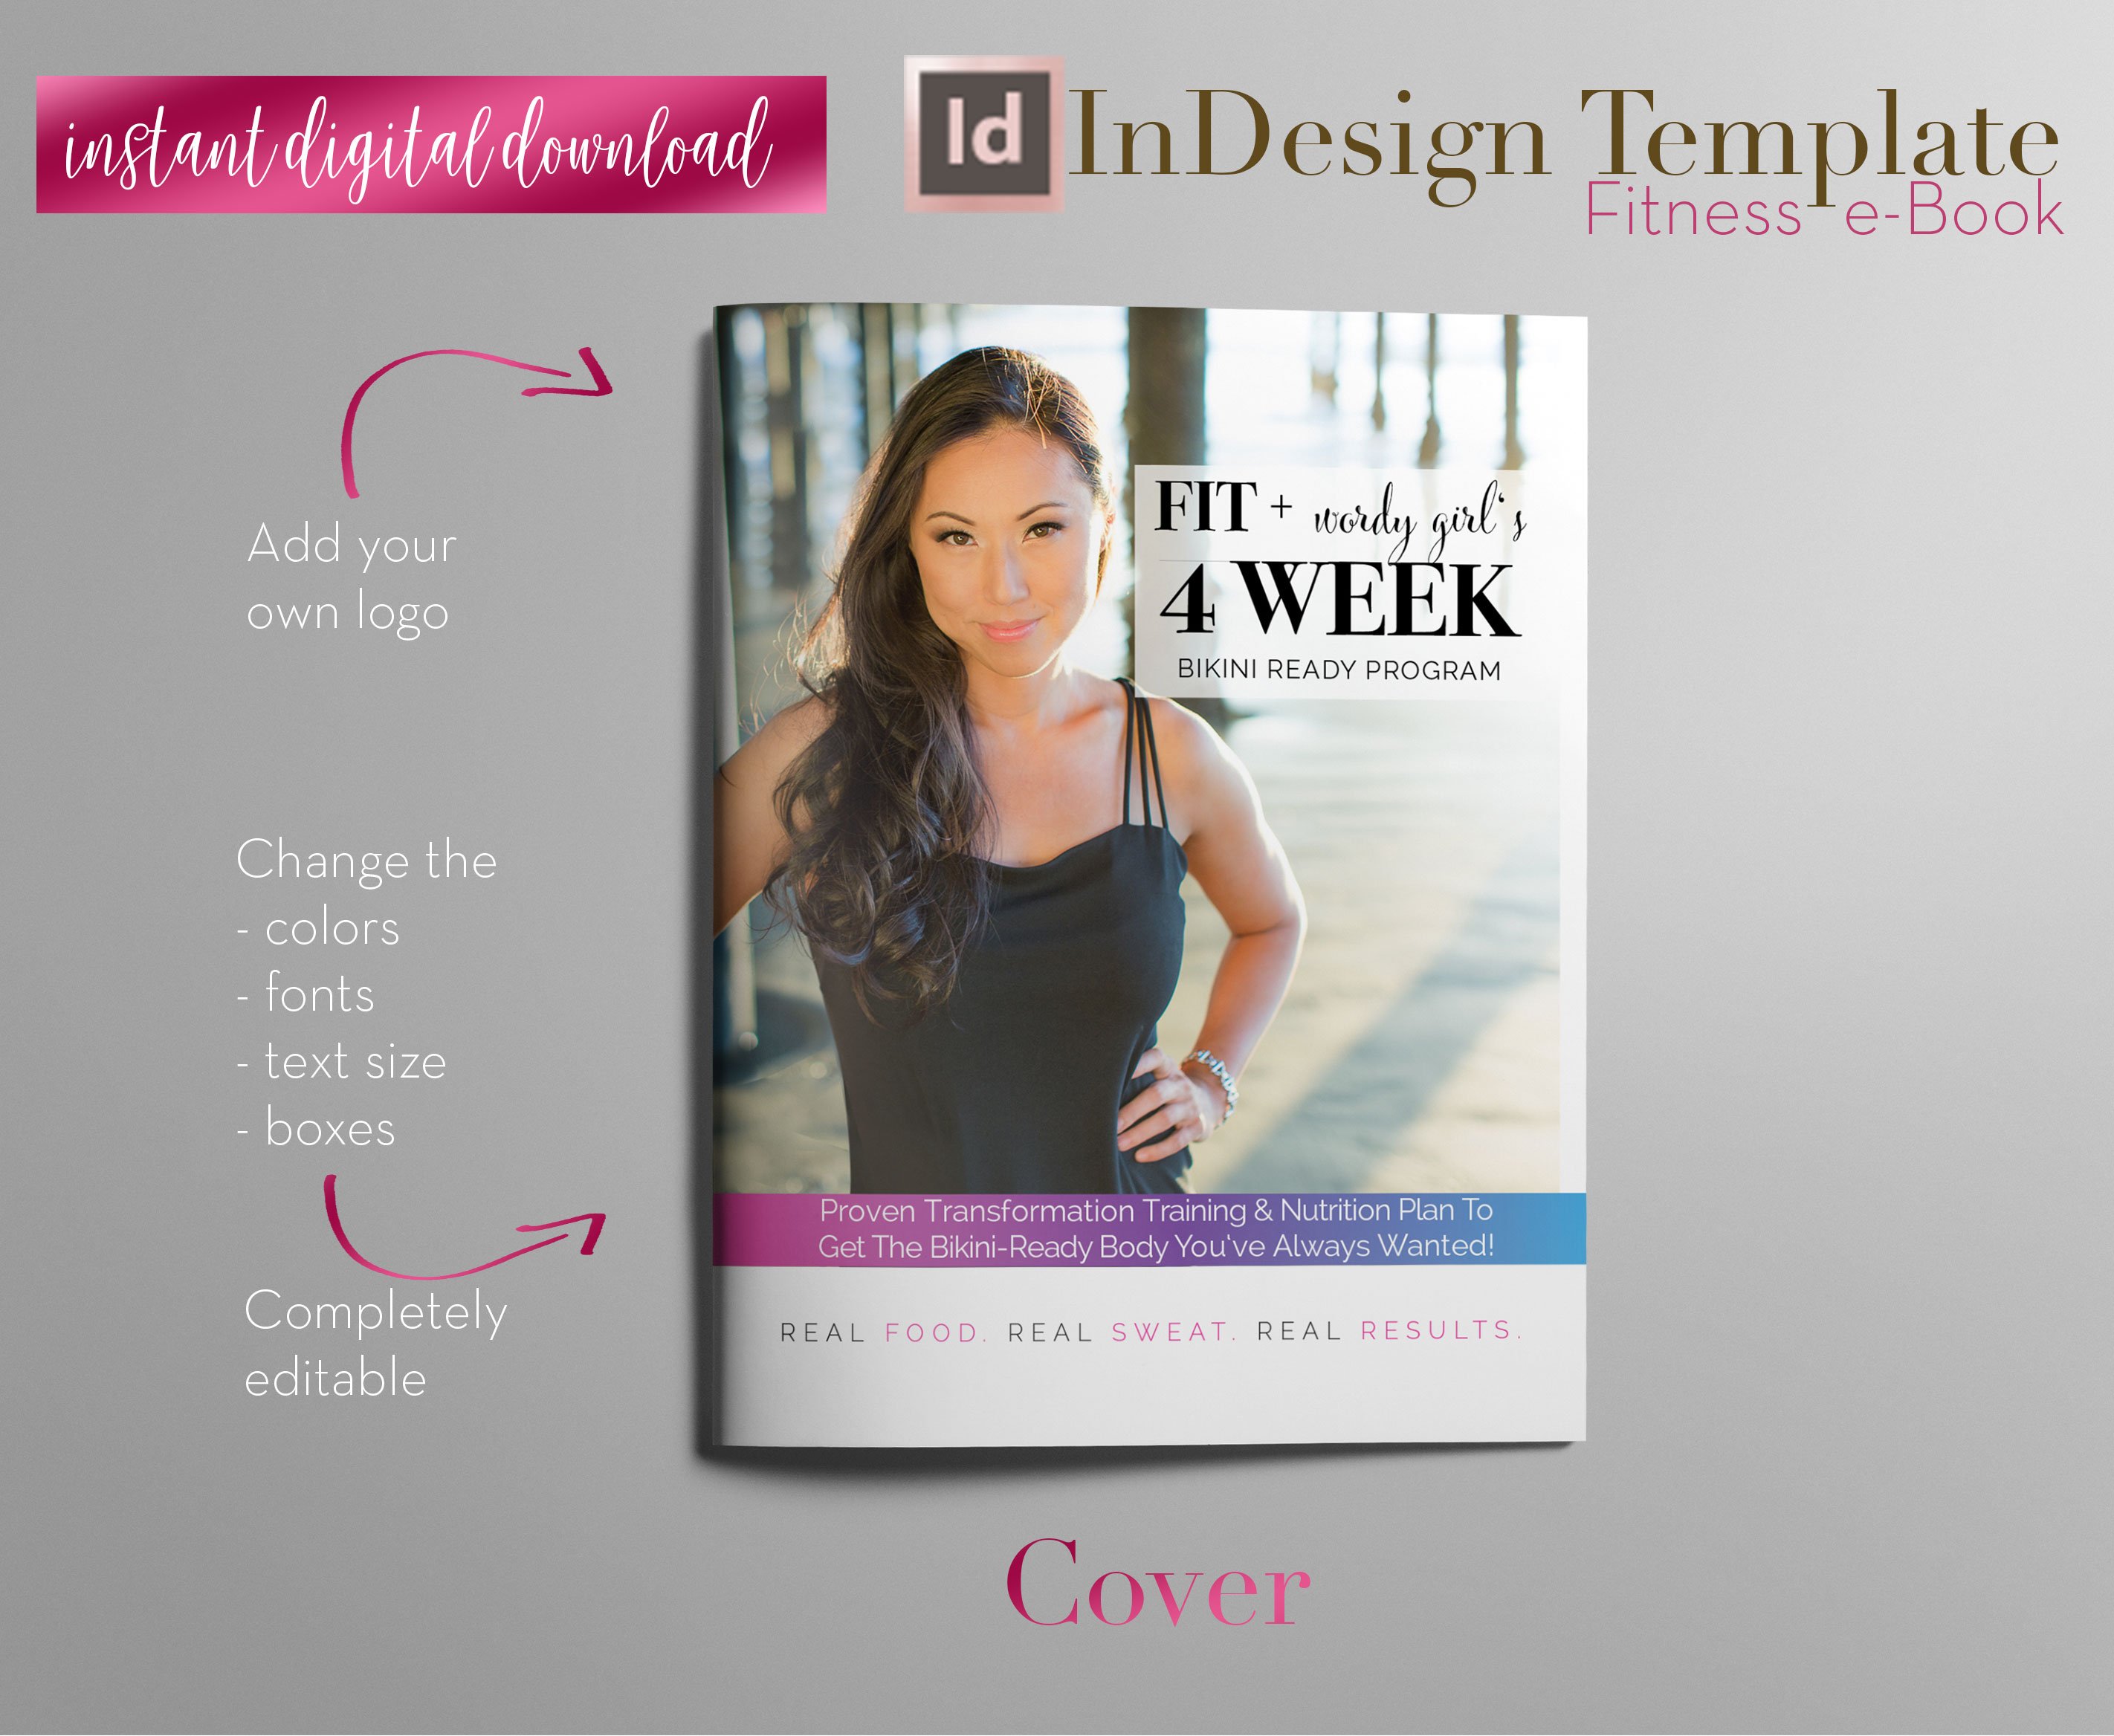 Fitness e-Book | InDesign Template cover image.